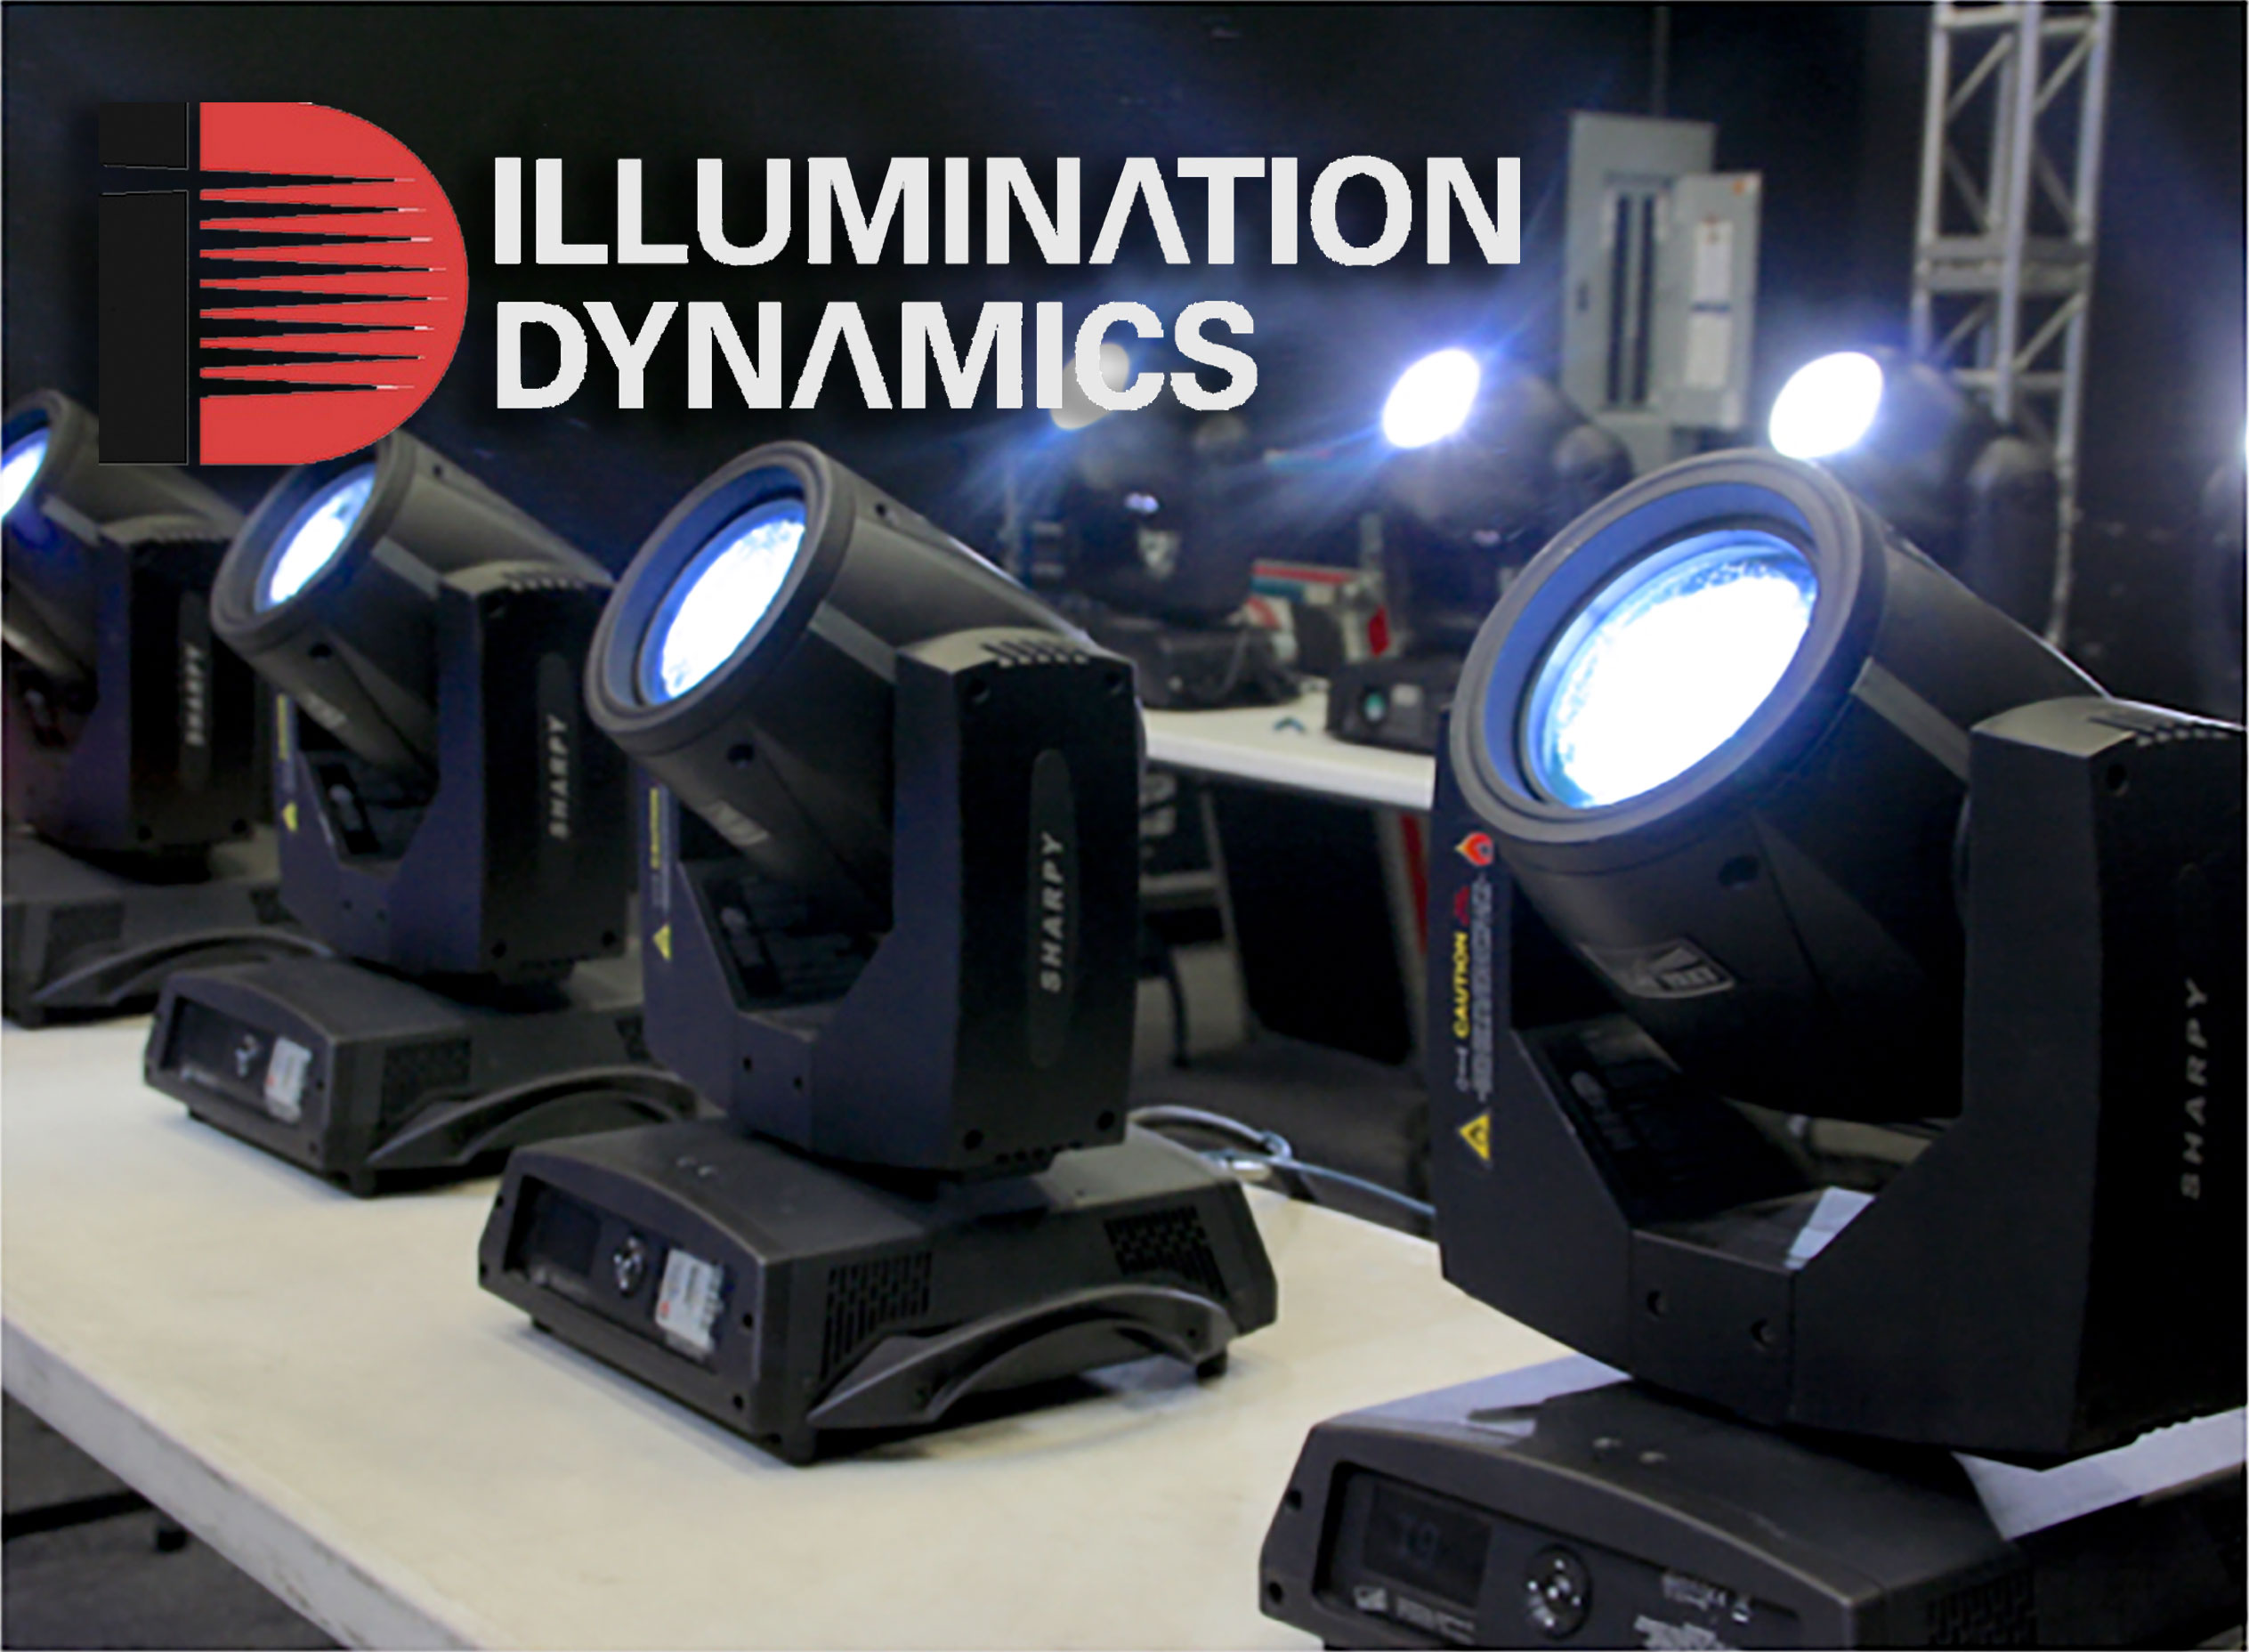 Tiger Group Selling Excess Filmmaking Equipment from Illumination Dynamics